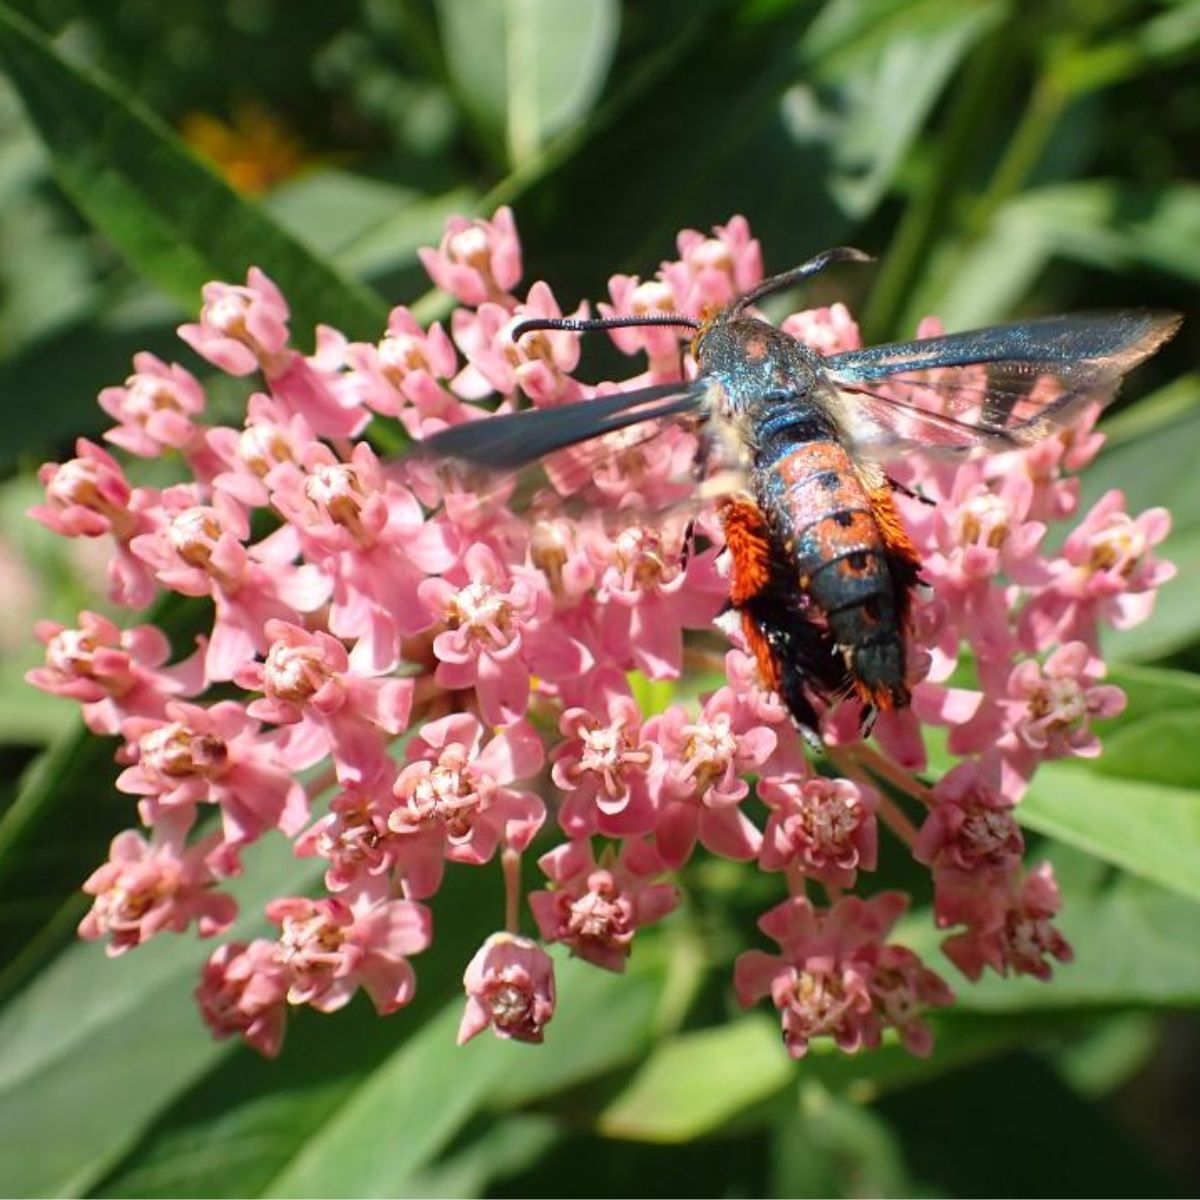 A squash vine borer moth sipping the nectar of a swamp milkweed flower.